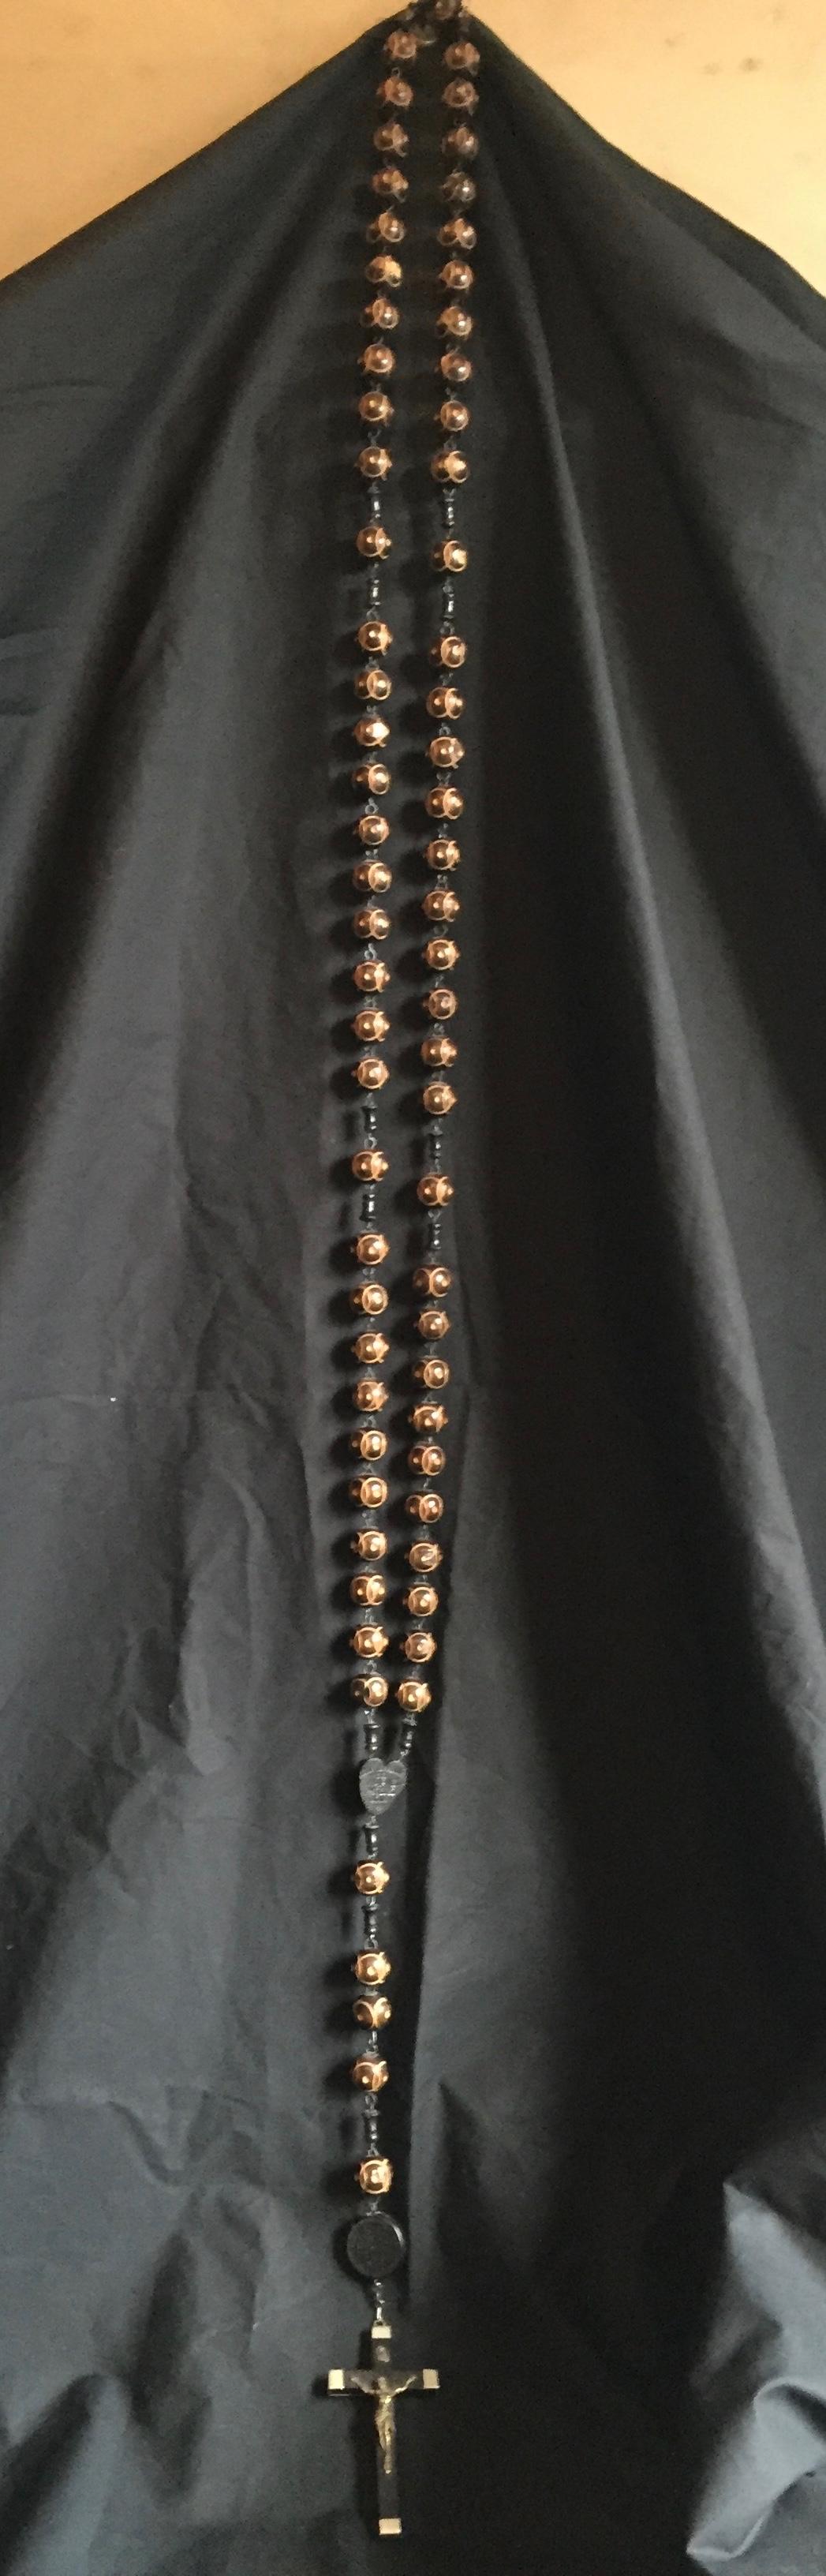 20th Century Large Nuns Rosary with Ebony Crucifix from Lourdes France For Sale